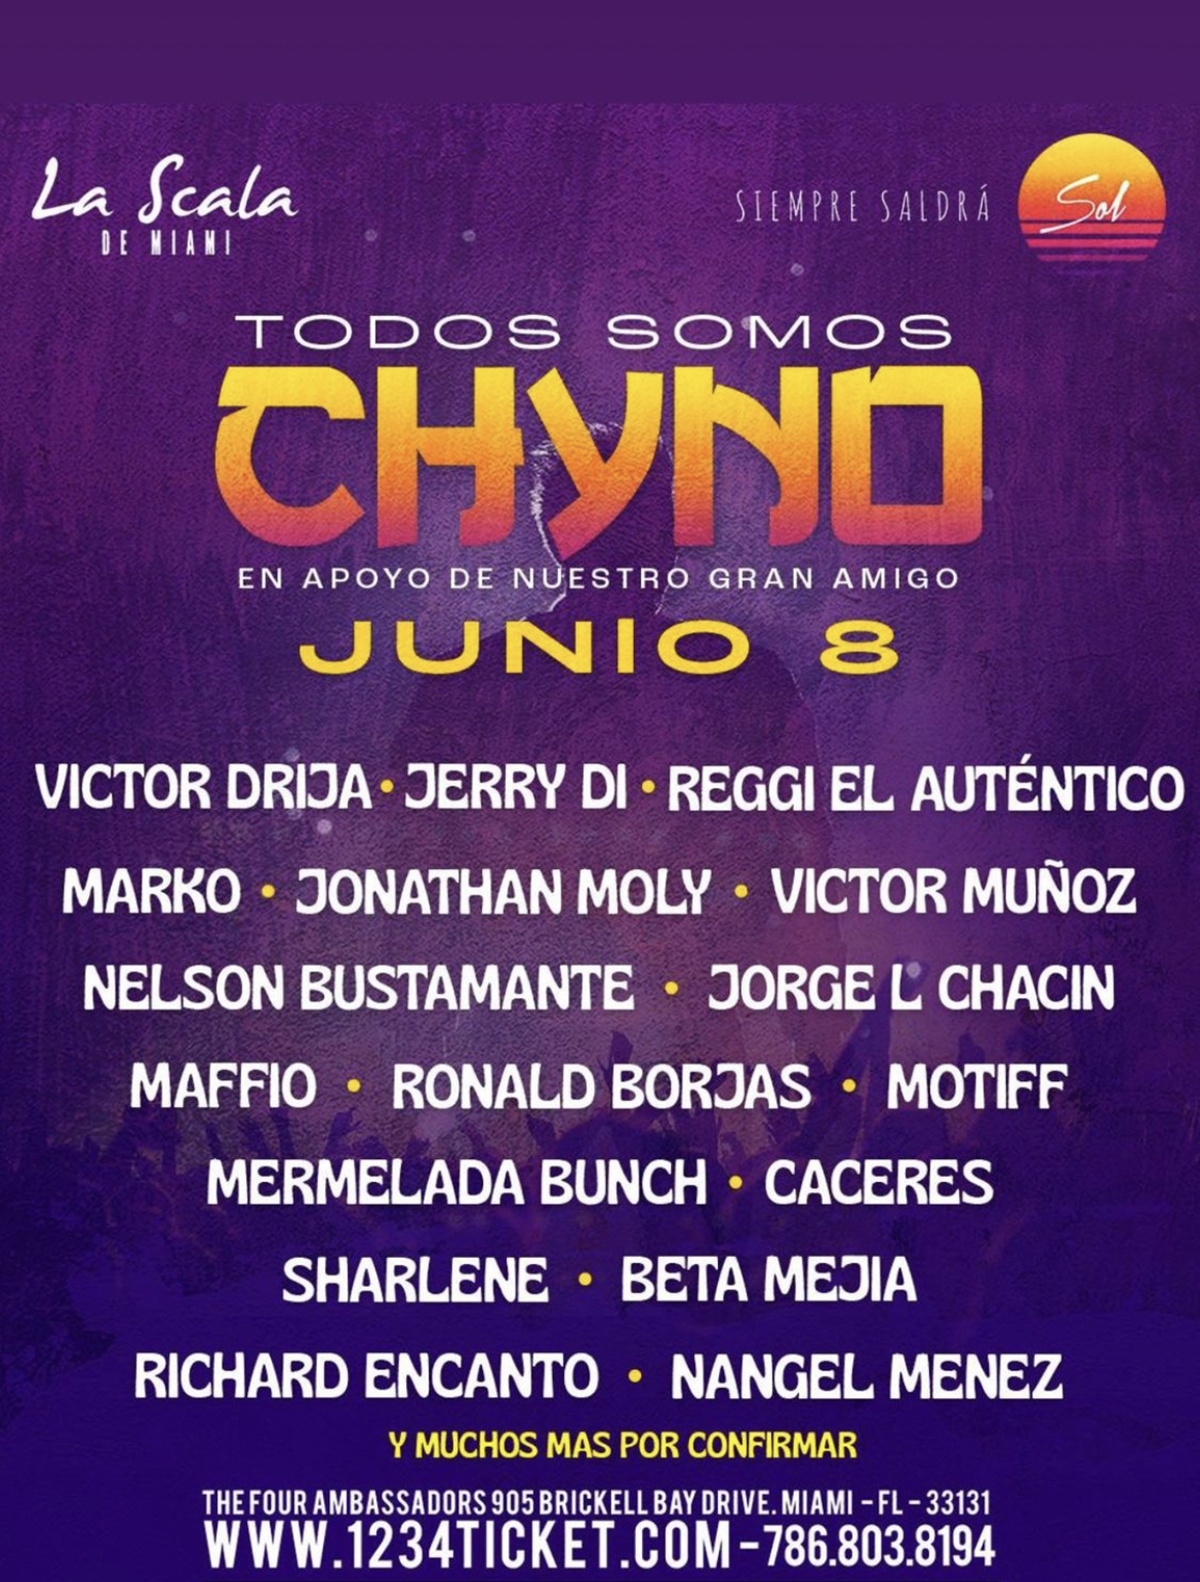 They organize a concert for Chyno's health